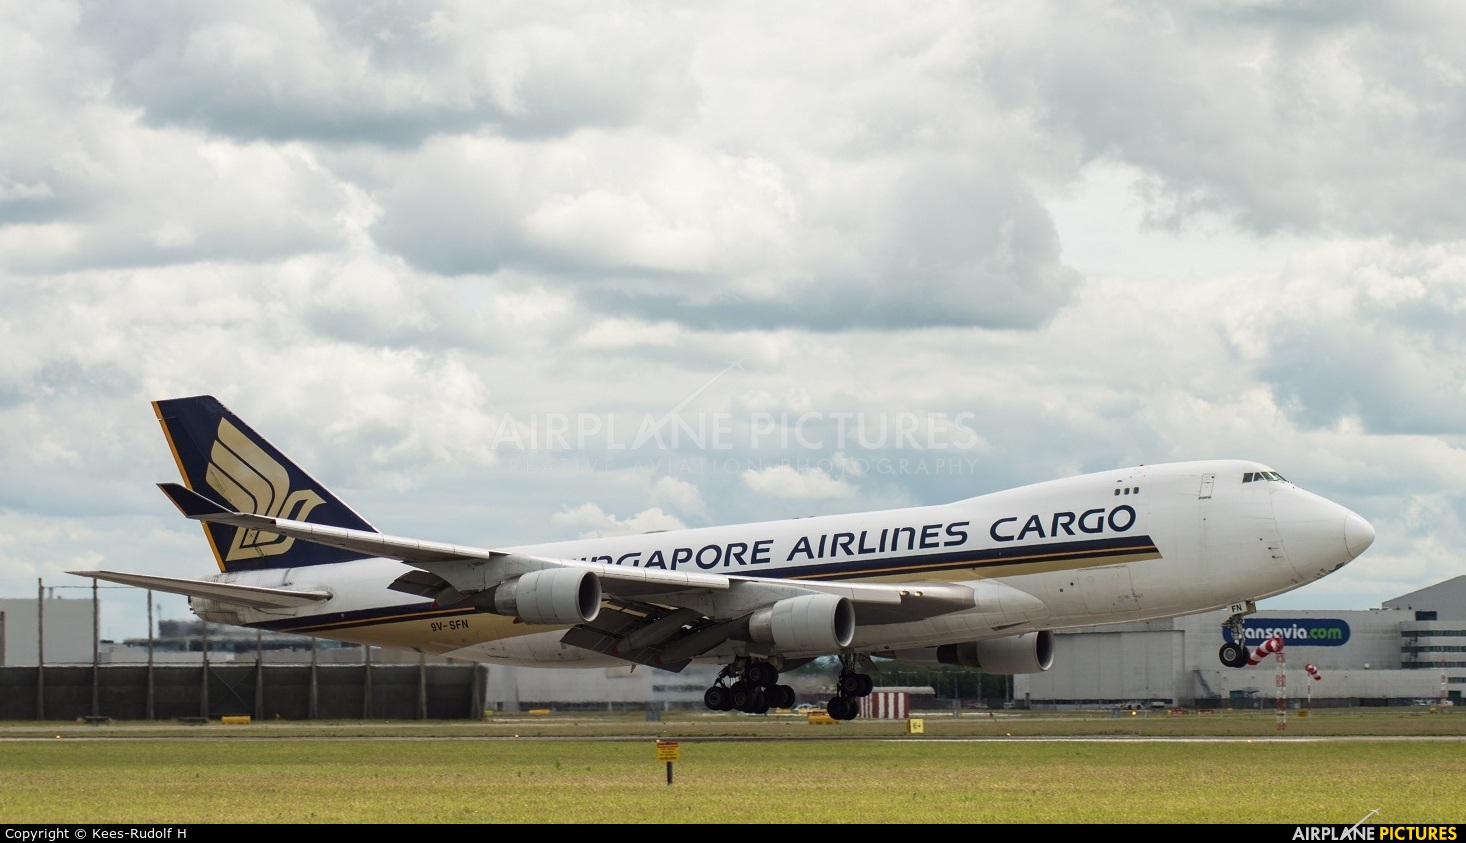 Singapore Airlines Cargo 9V-SFN aircraft at Amsterdam - Schiphol